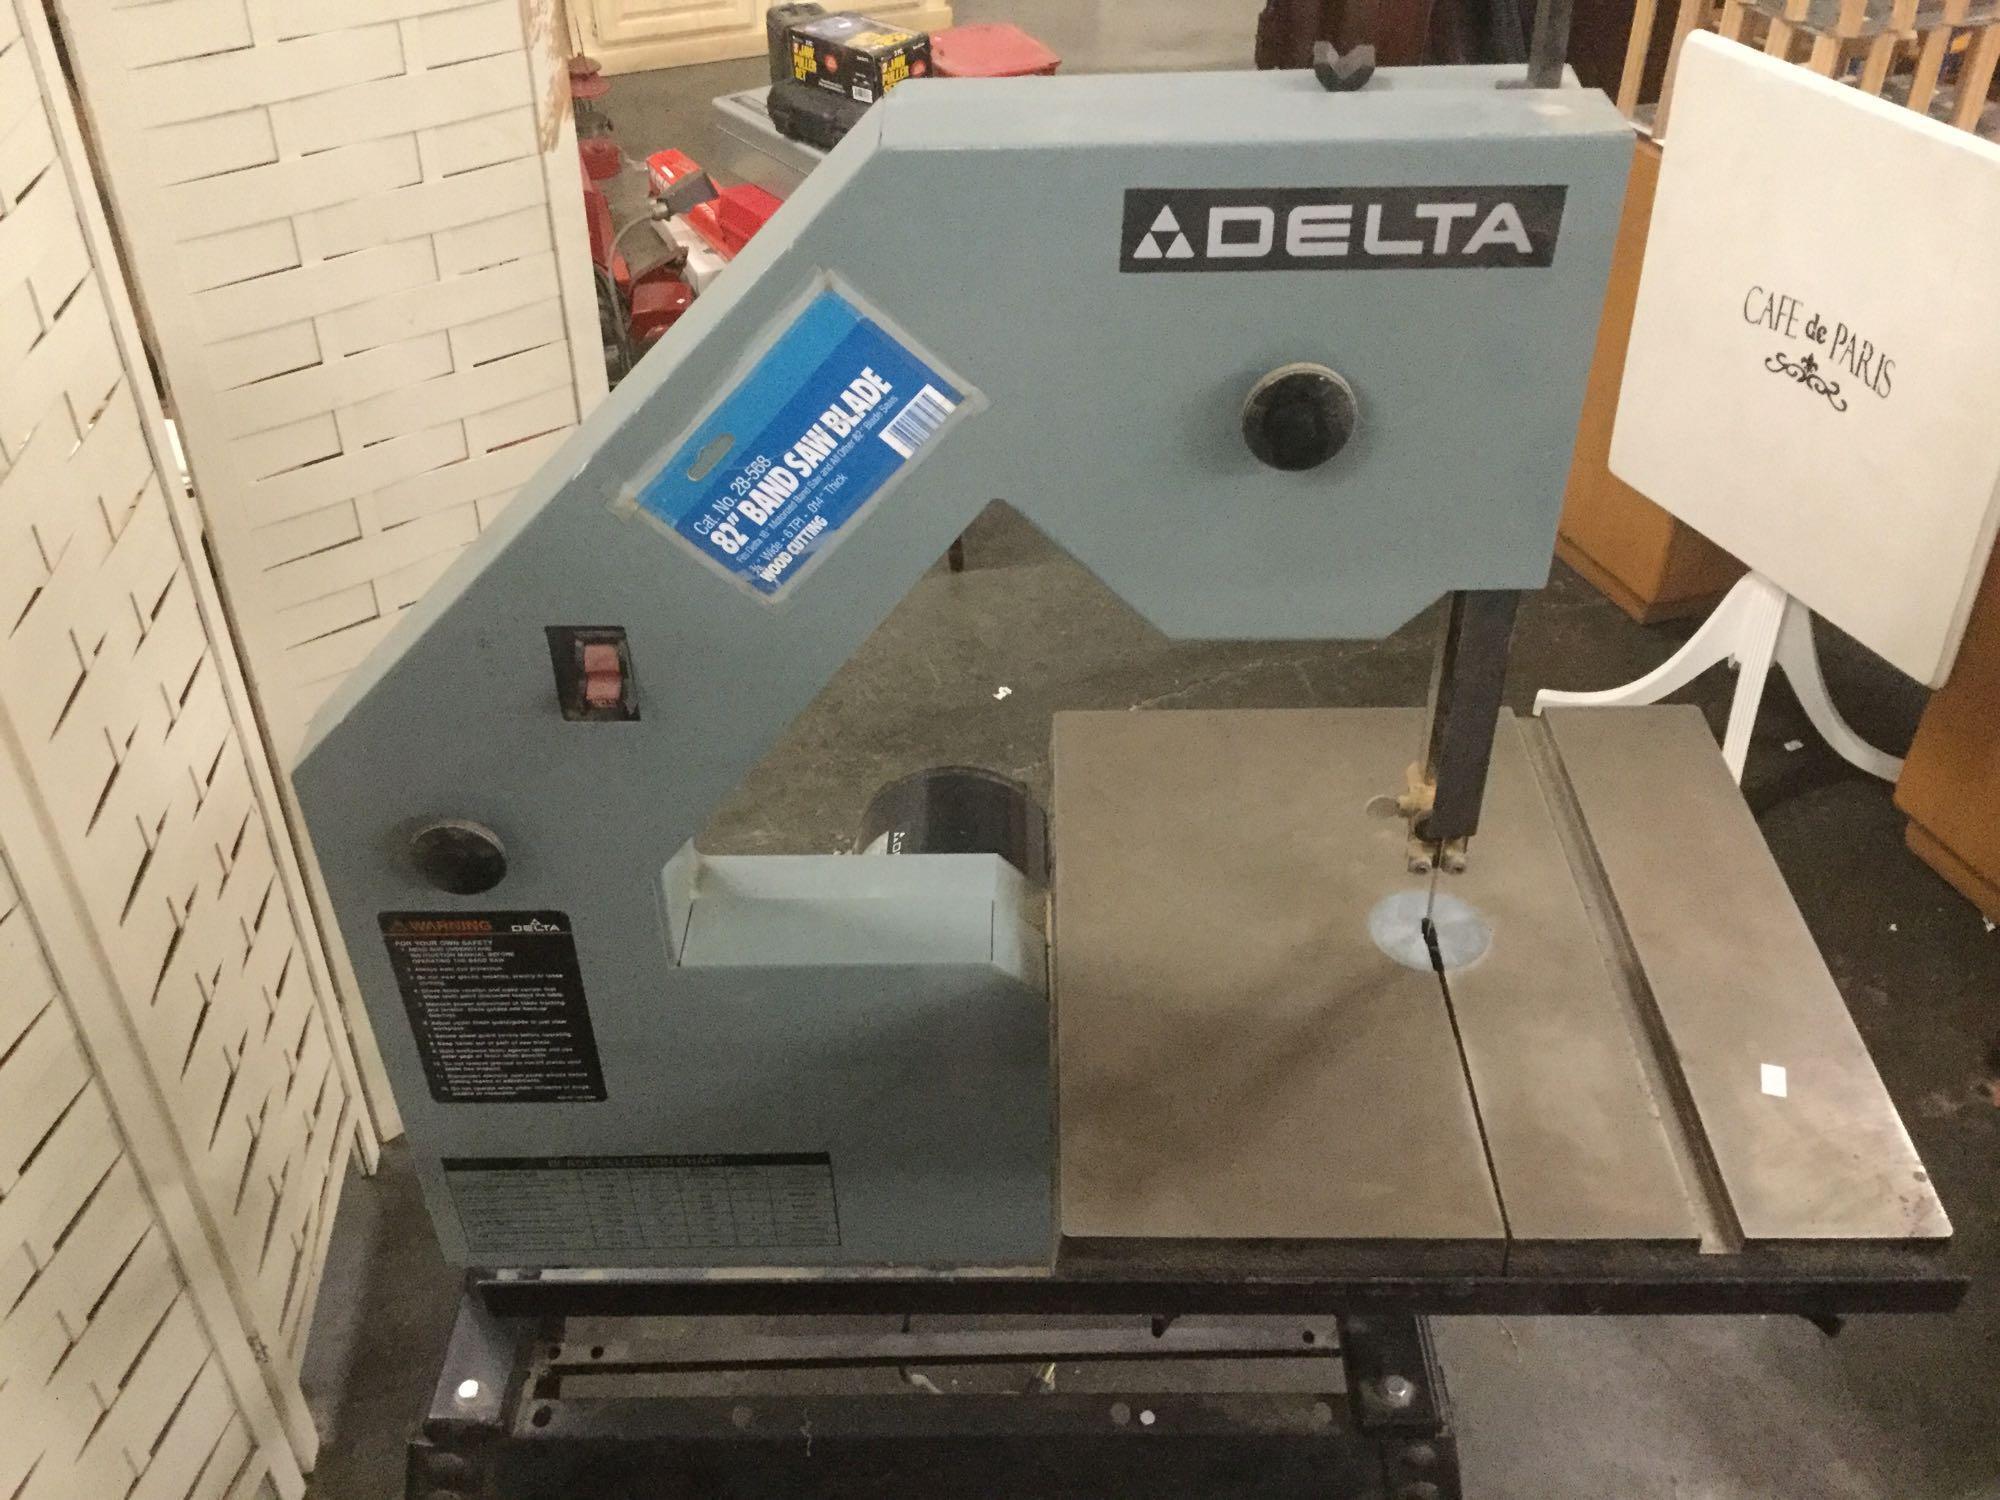 Delta Motorized Band Saw, model no. S55EYE3287, tested and working